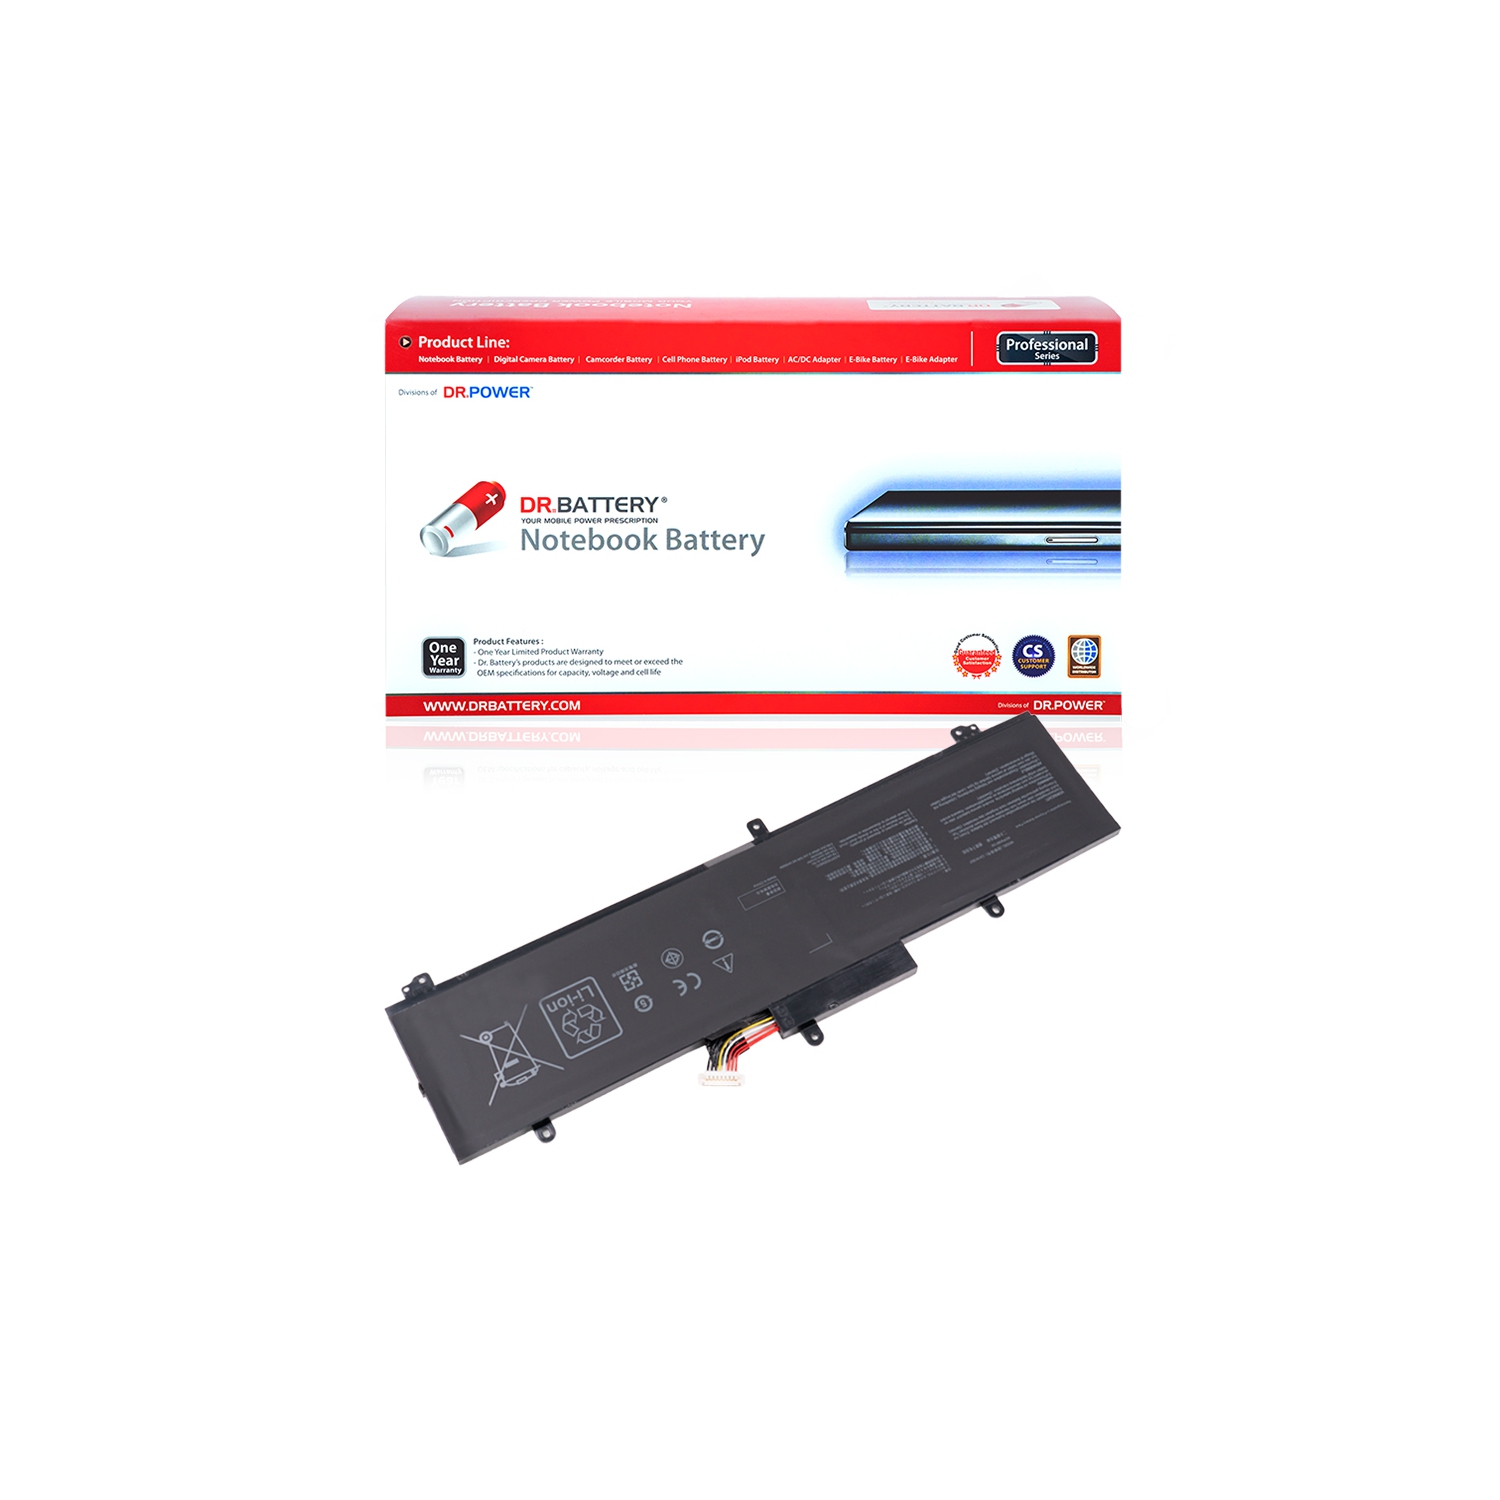 DR. BATTERY - Replacement for Asus ROG Zephyrus G GA502DU-AL027T / GA502DU-AL031T / GA502DU-AL041T / 134 / C41N1837